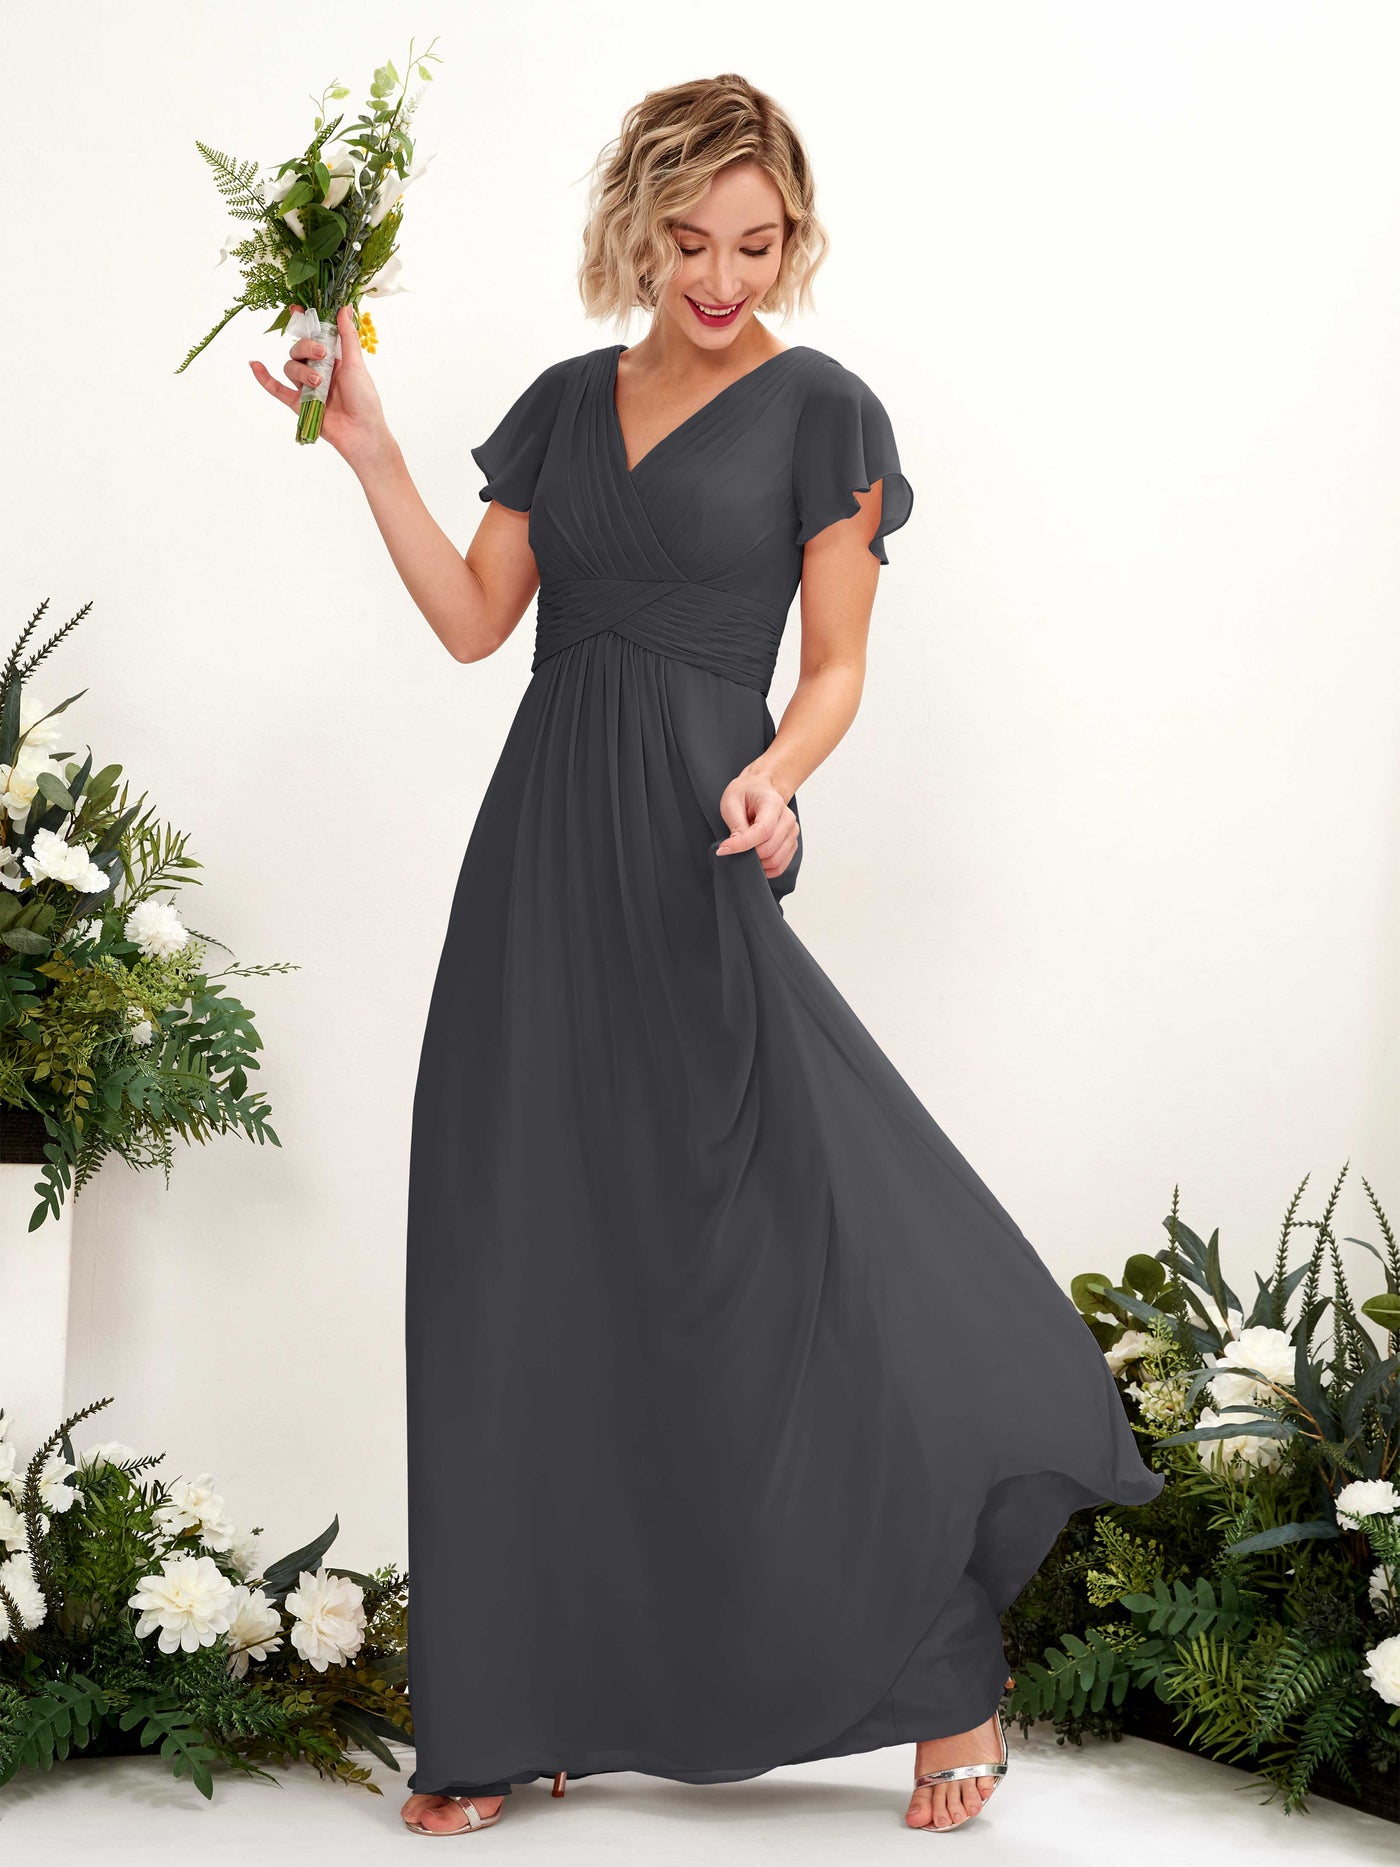 Pewter Bridesmaid Dresses Bridesmaid Dress A-line Chiffon V-neck Full Length Short Sleeves Wedding Party Dress (81224338)#color_pewter